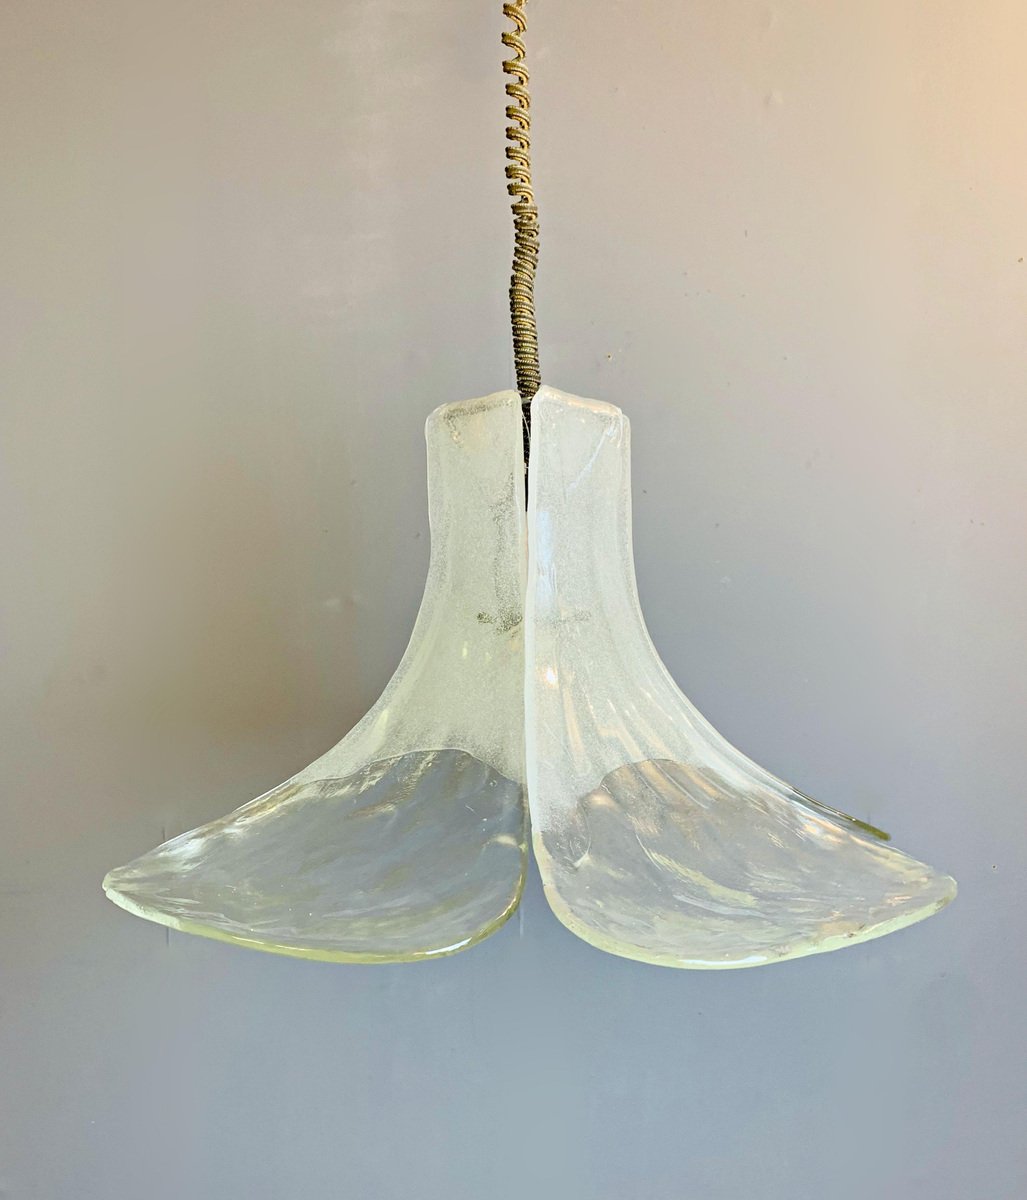 Murano Glass Hanging Lamp by Carlo Nason, 1960s for sale at Pamono